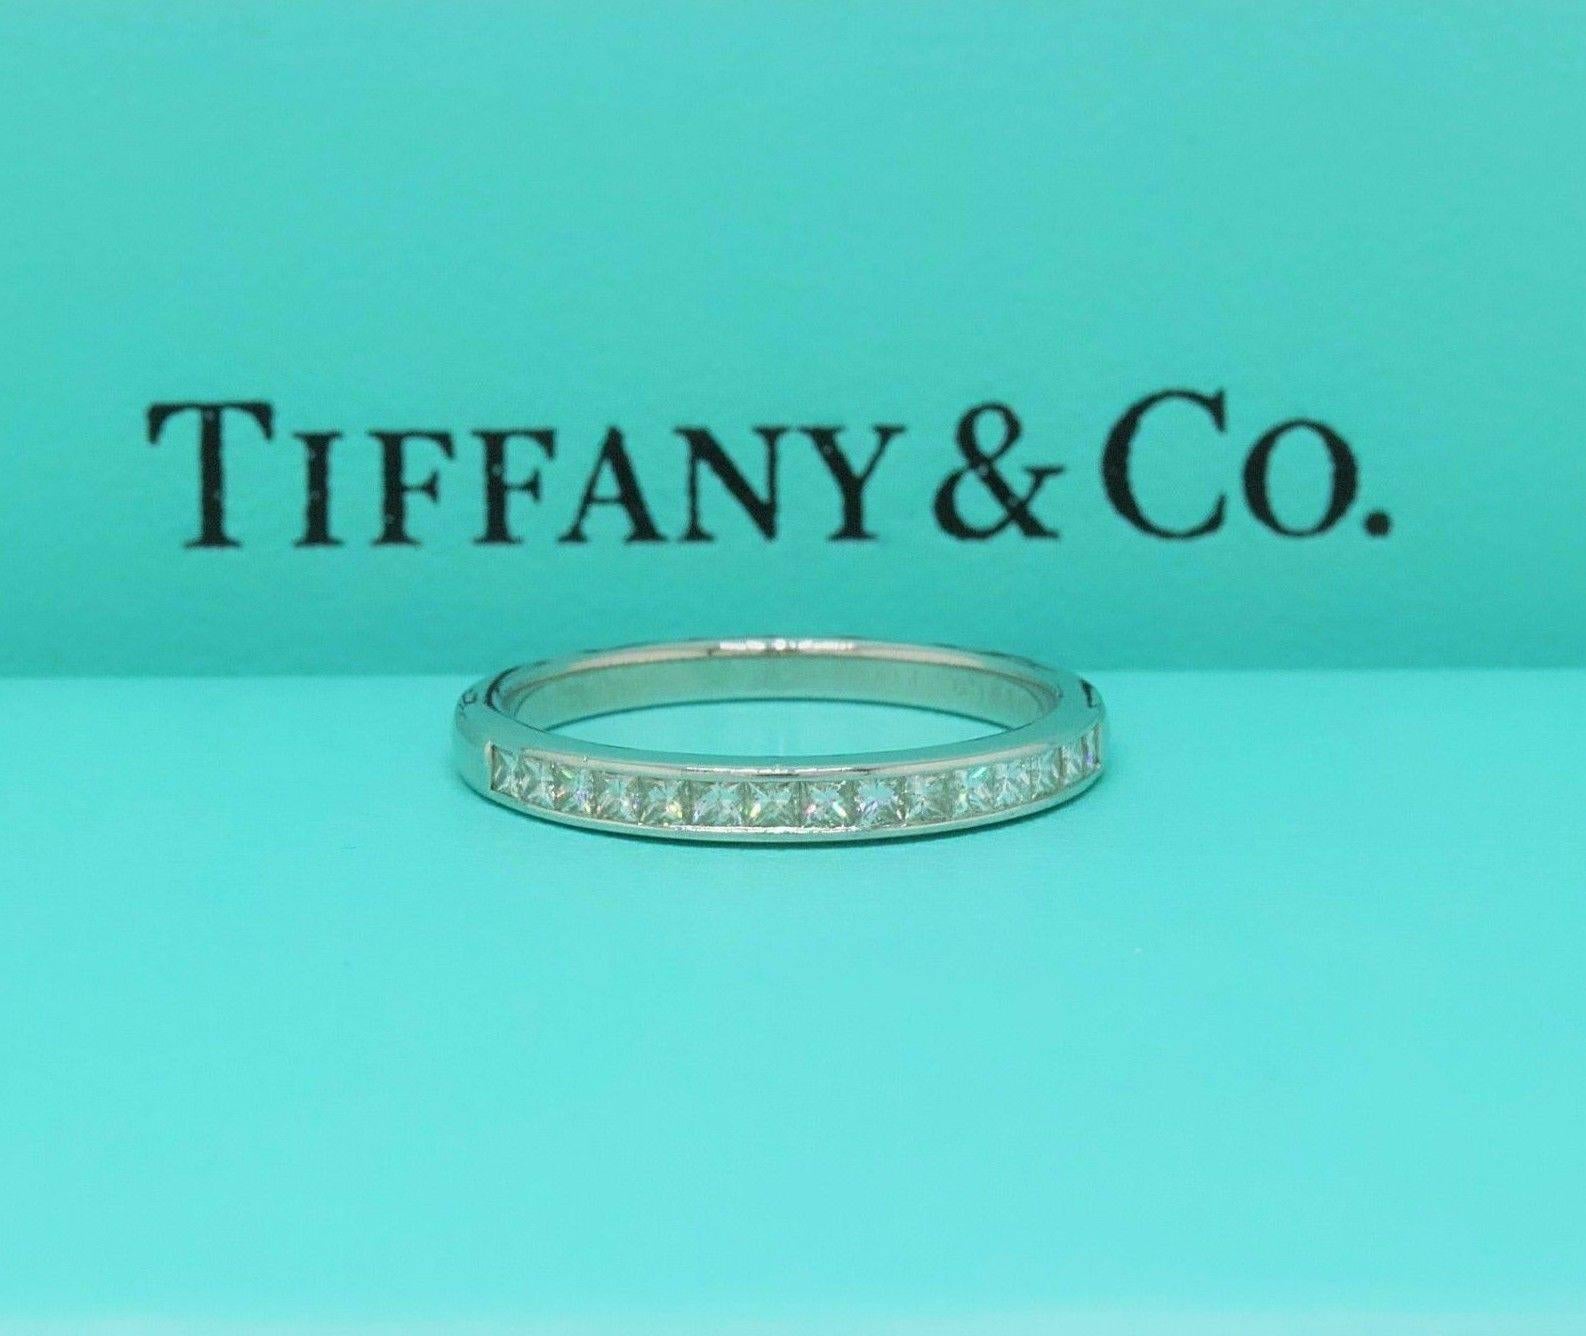 Modern Tiffany & Co. Square Cut Diamond Wedding Band Ring in Platinum 0.39 tcw 2.6 MM For Sale